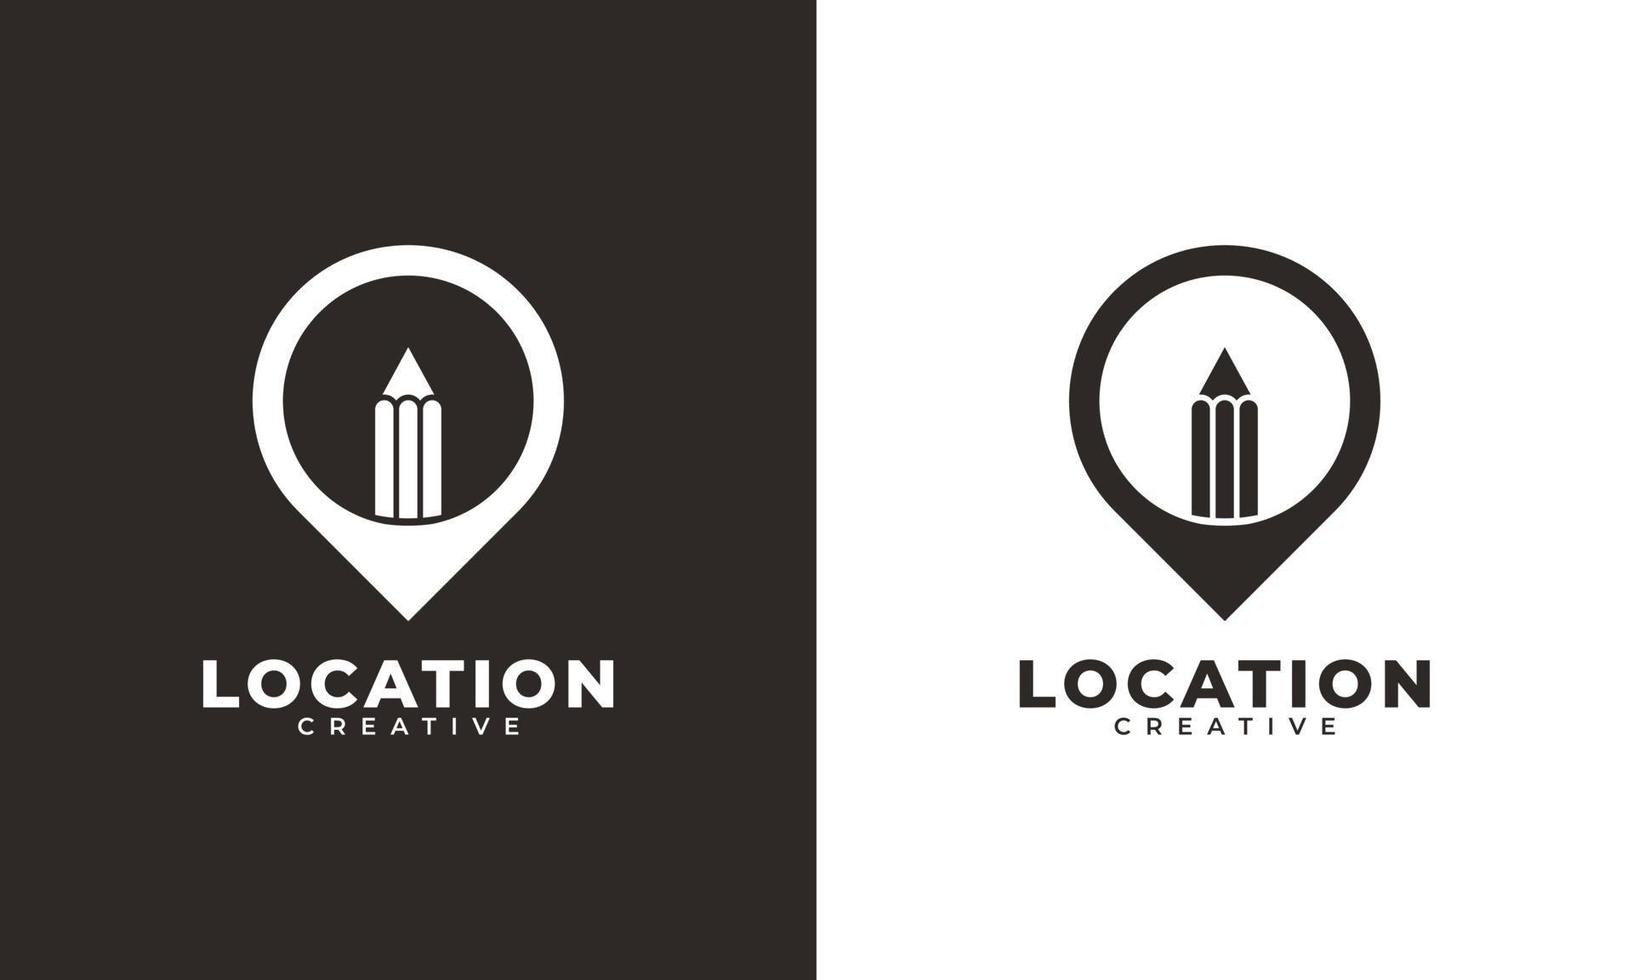 Creative Pin Location Logo. Pencil Combined with Point Map Icon Vector Illustration